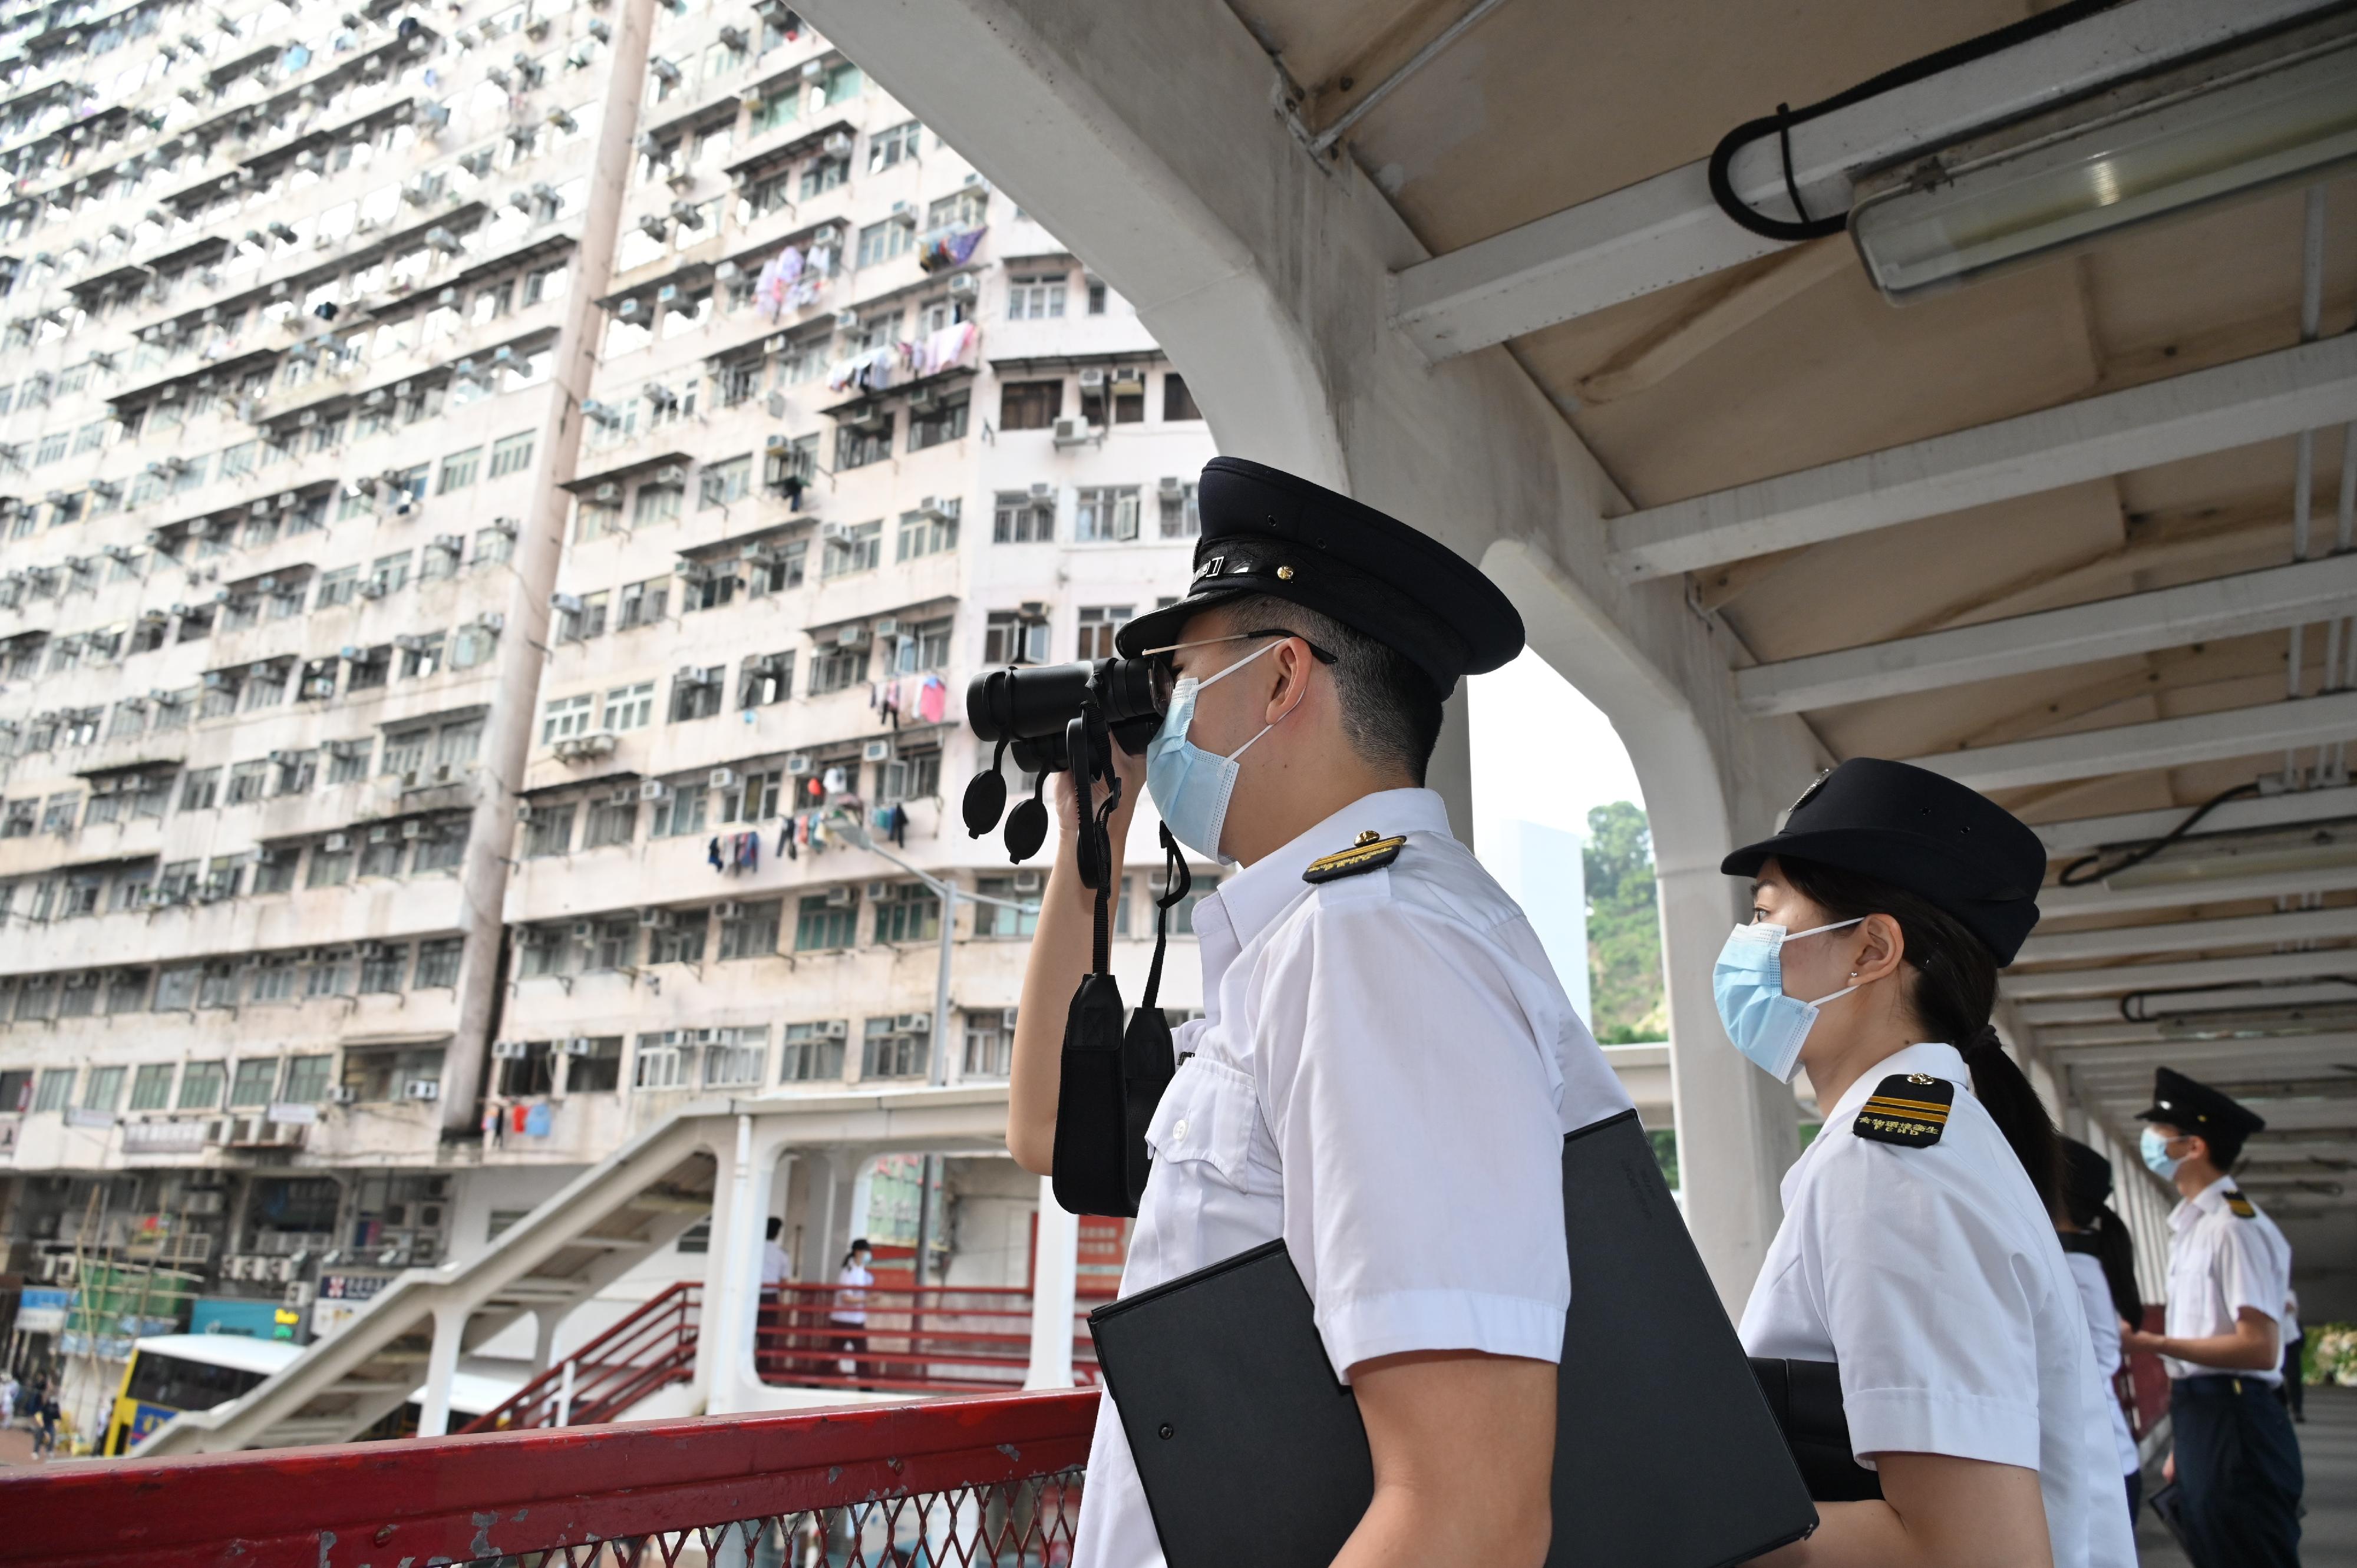 A spokesman for the Food and Environmental Hygiene Department said today (May 20) that the department has launched a pilot enforcement operation, codenamed "CLEARSKY", across various districts in the recent days. The operation has achieved significant results by proactively enhancing inspections to target buildings with dripping air conditioners, complemented by education and publicity efforts.